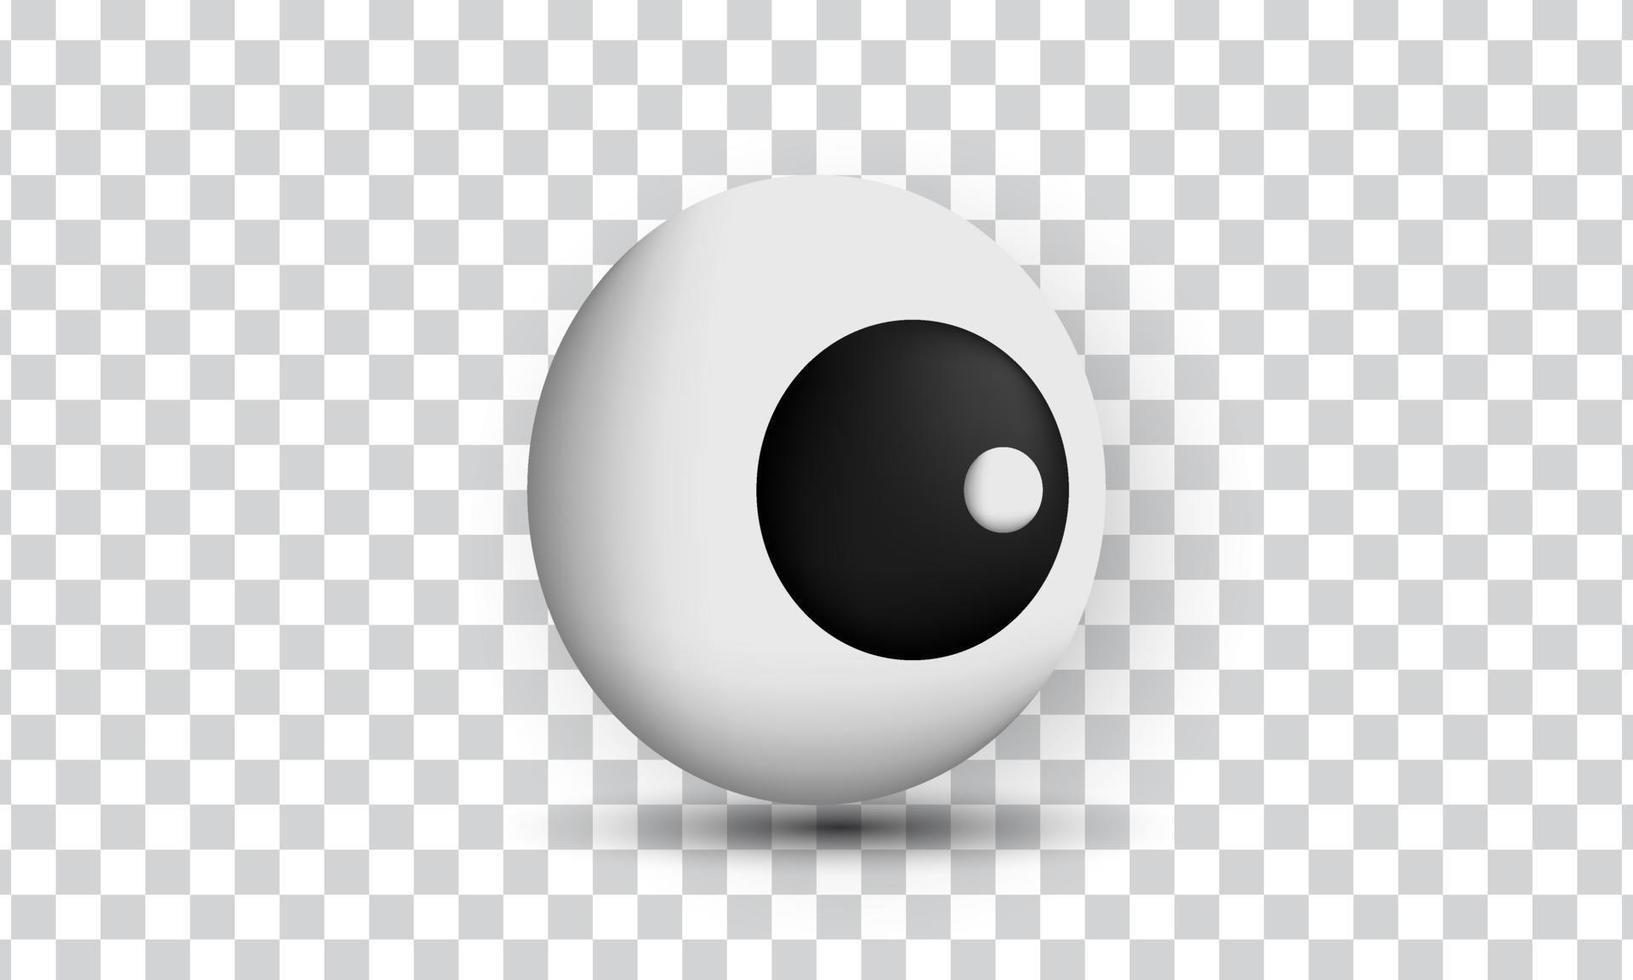 unique 3d eye concept design icon isolated on vector